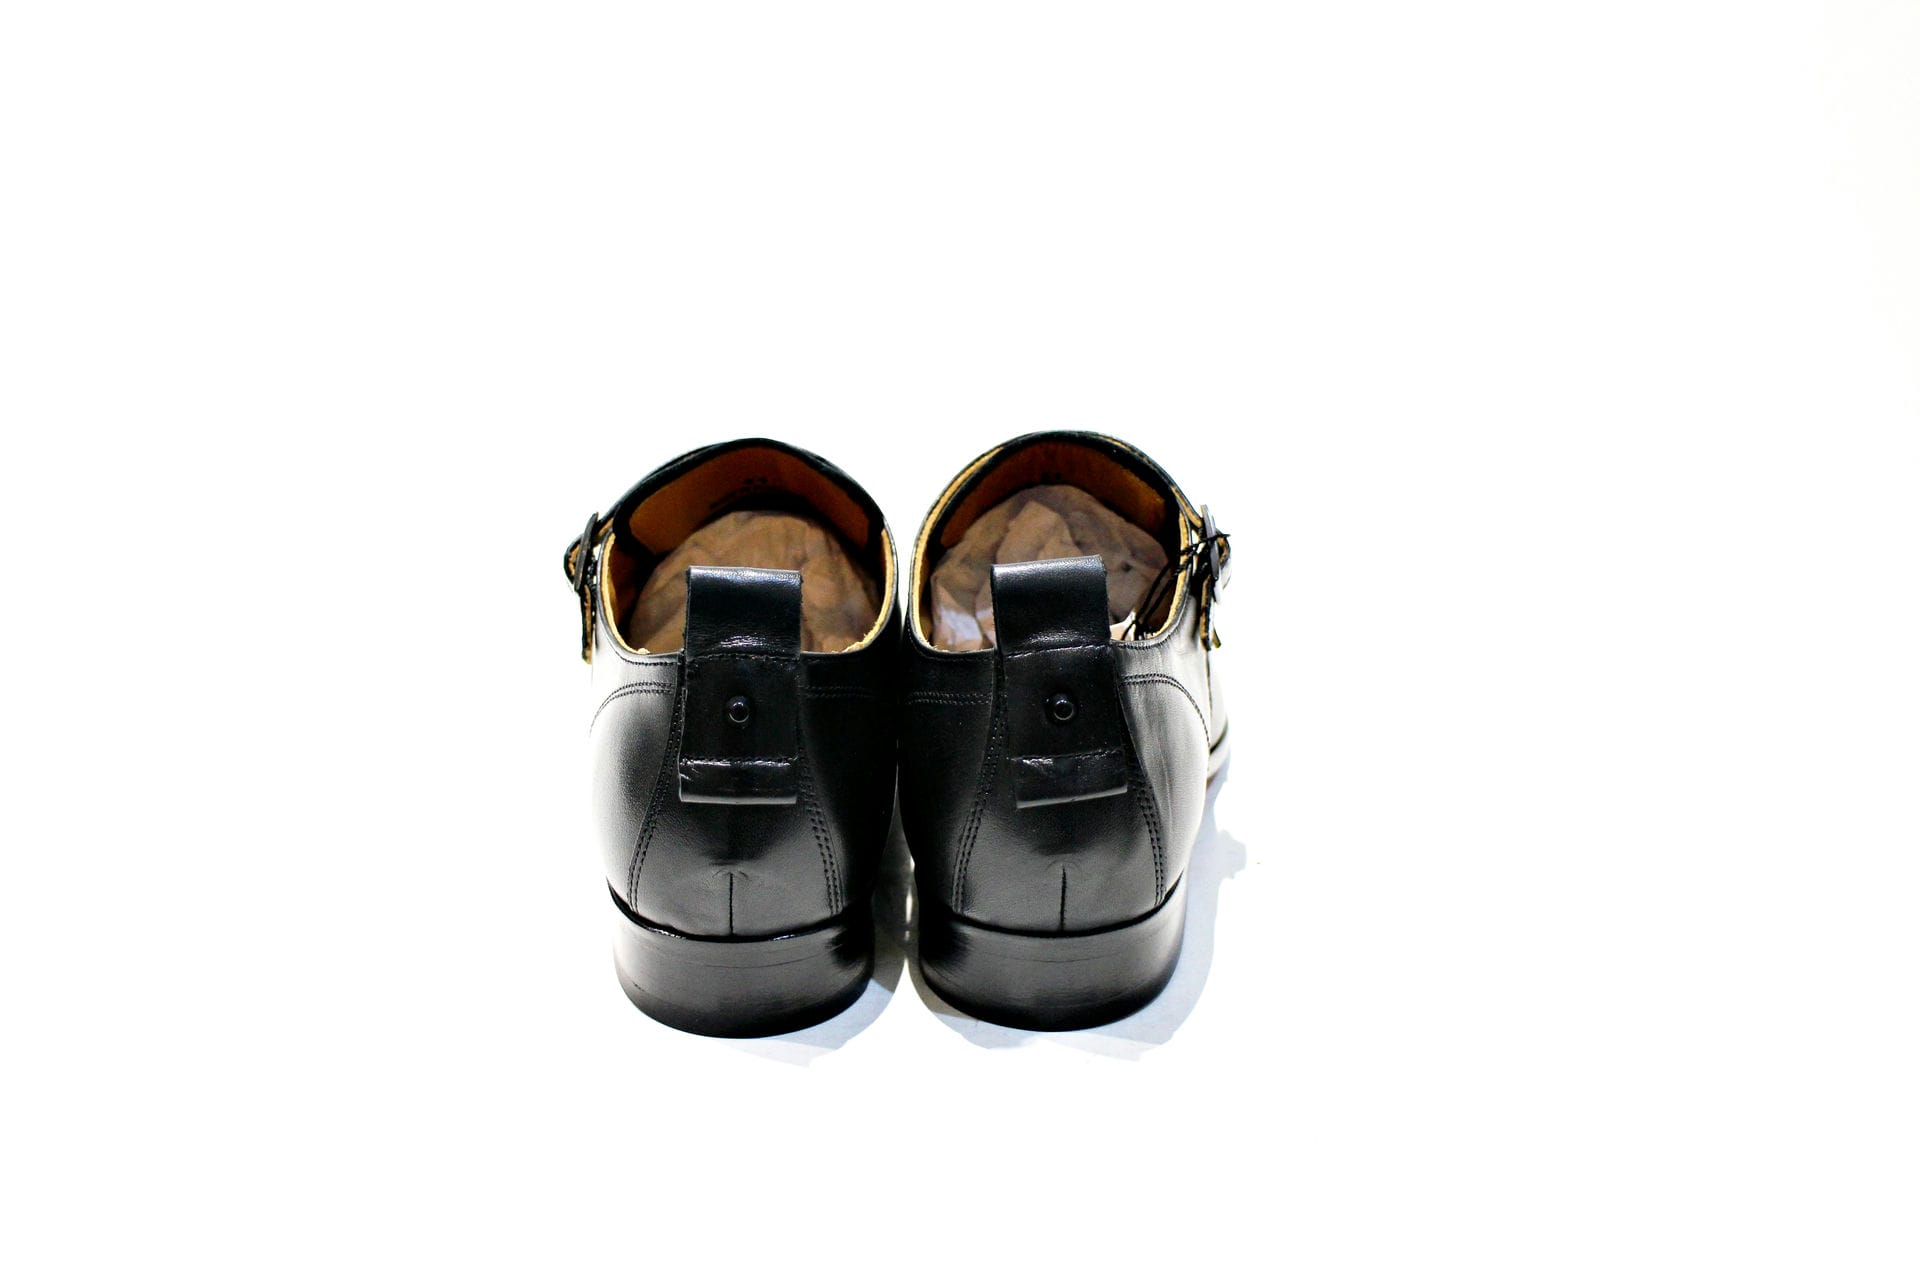 Man's shoe all composed of leather, with metal buckles. Handmade in Portugal. “Walk with Pintta